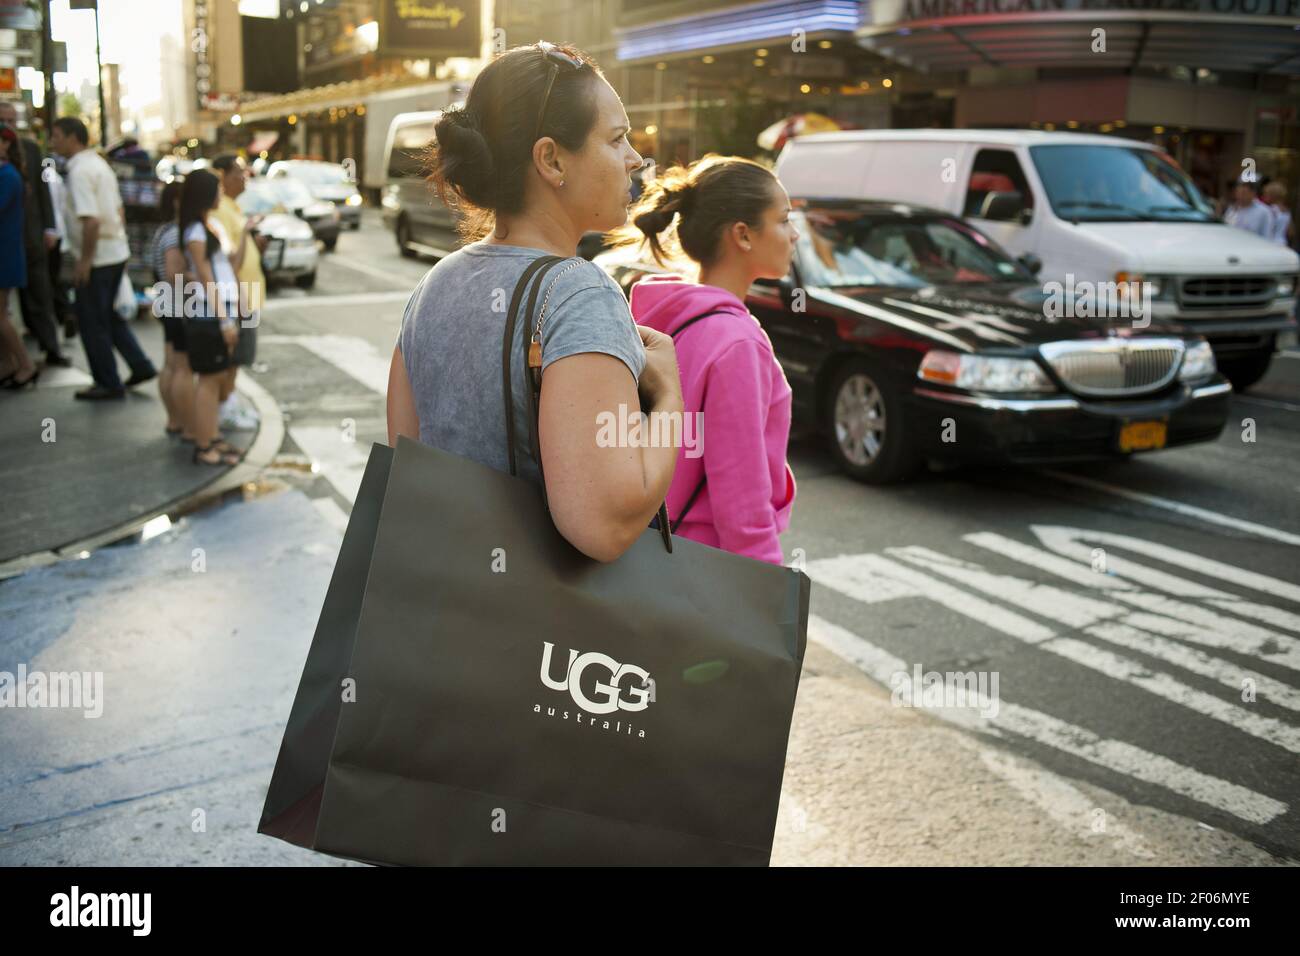 Shoppers in Times Square in New York are seen on Thursday, August 11, 2011.  Marcato Capital Management has exited their 8.5 percent stake in Deckers  Outdoor, the parent company of the Ugg